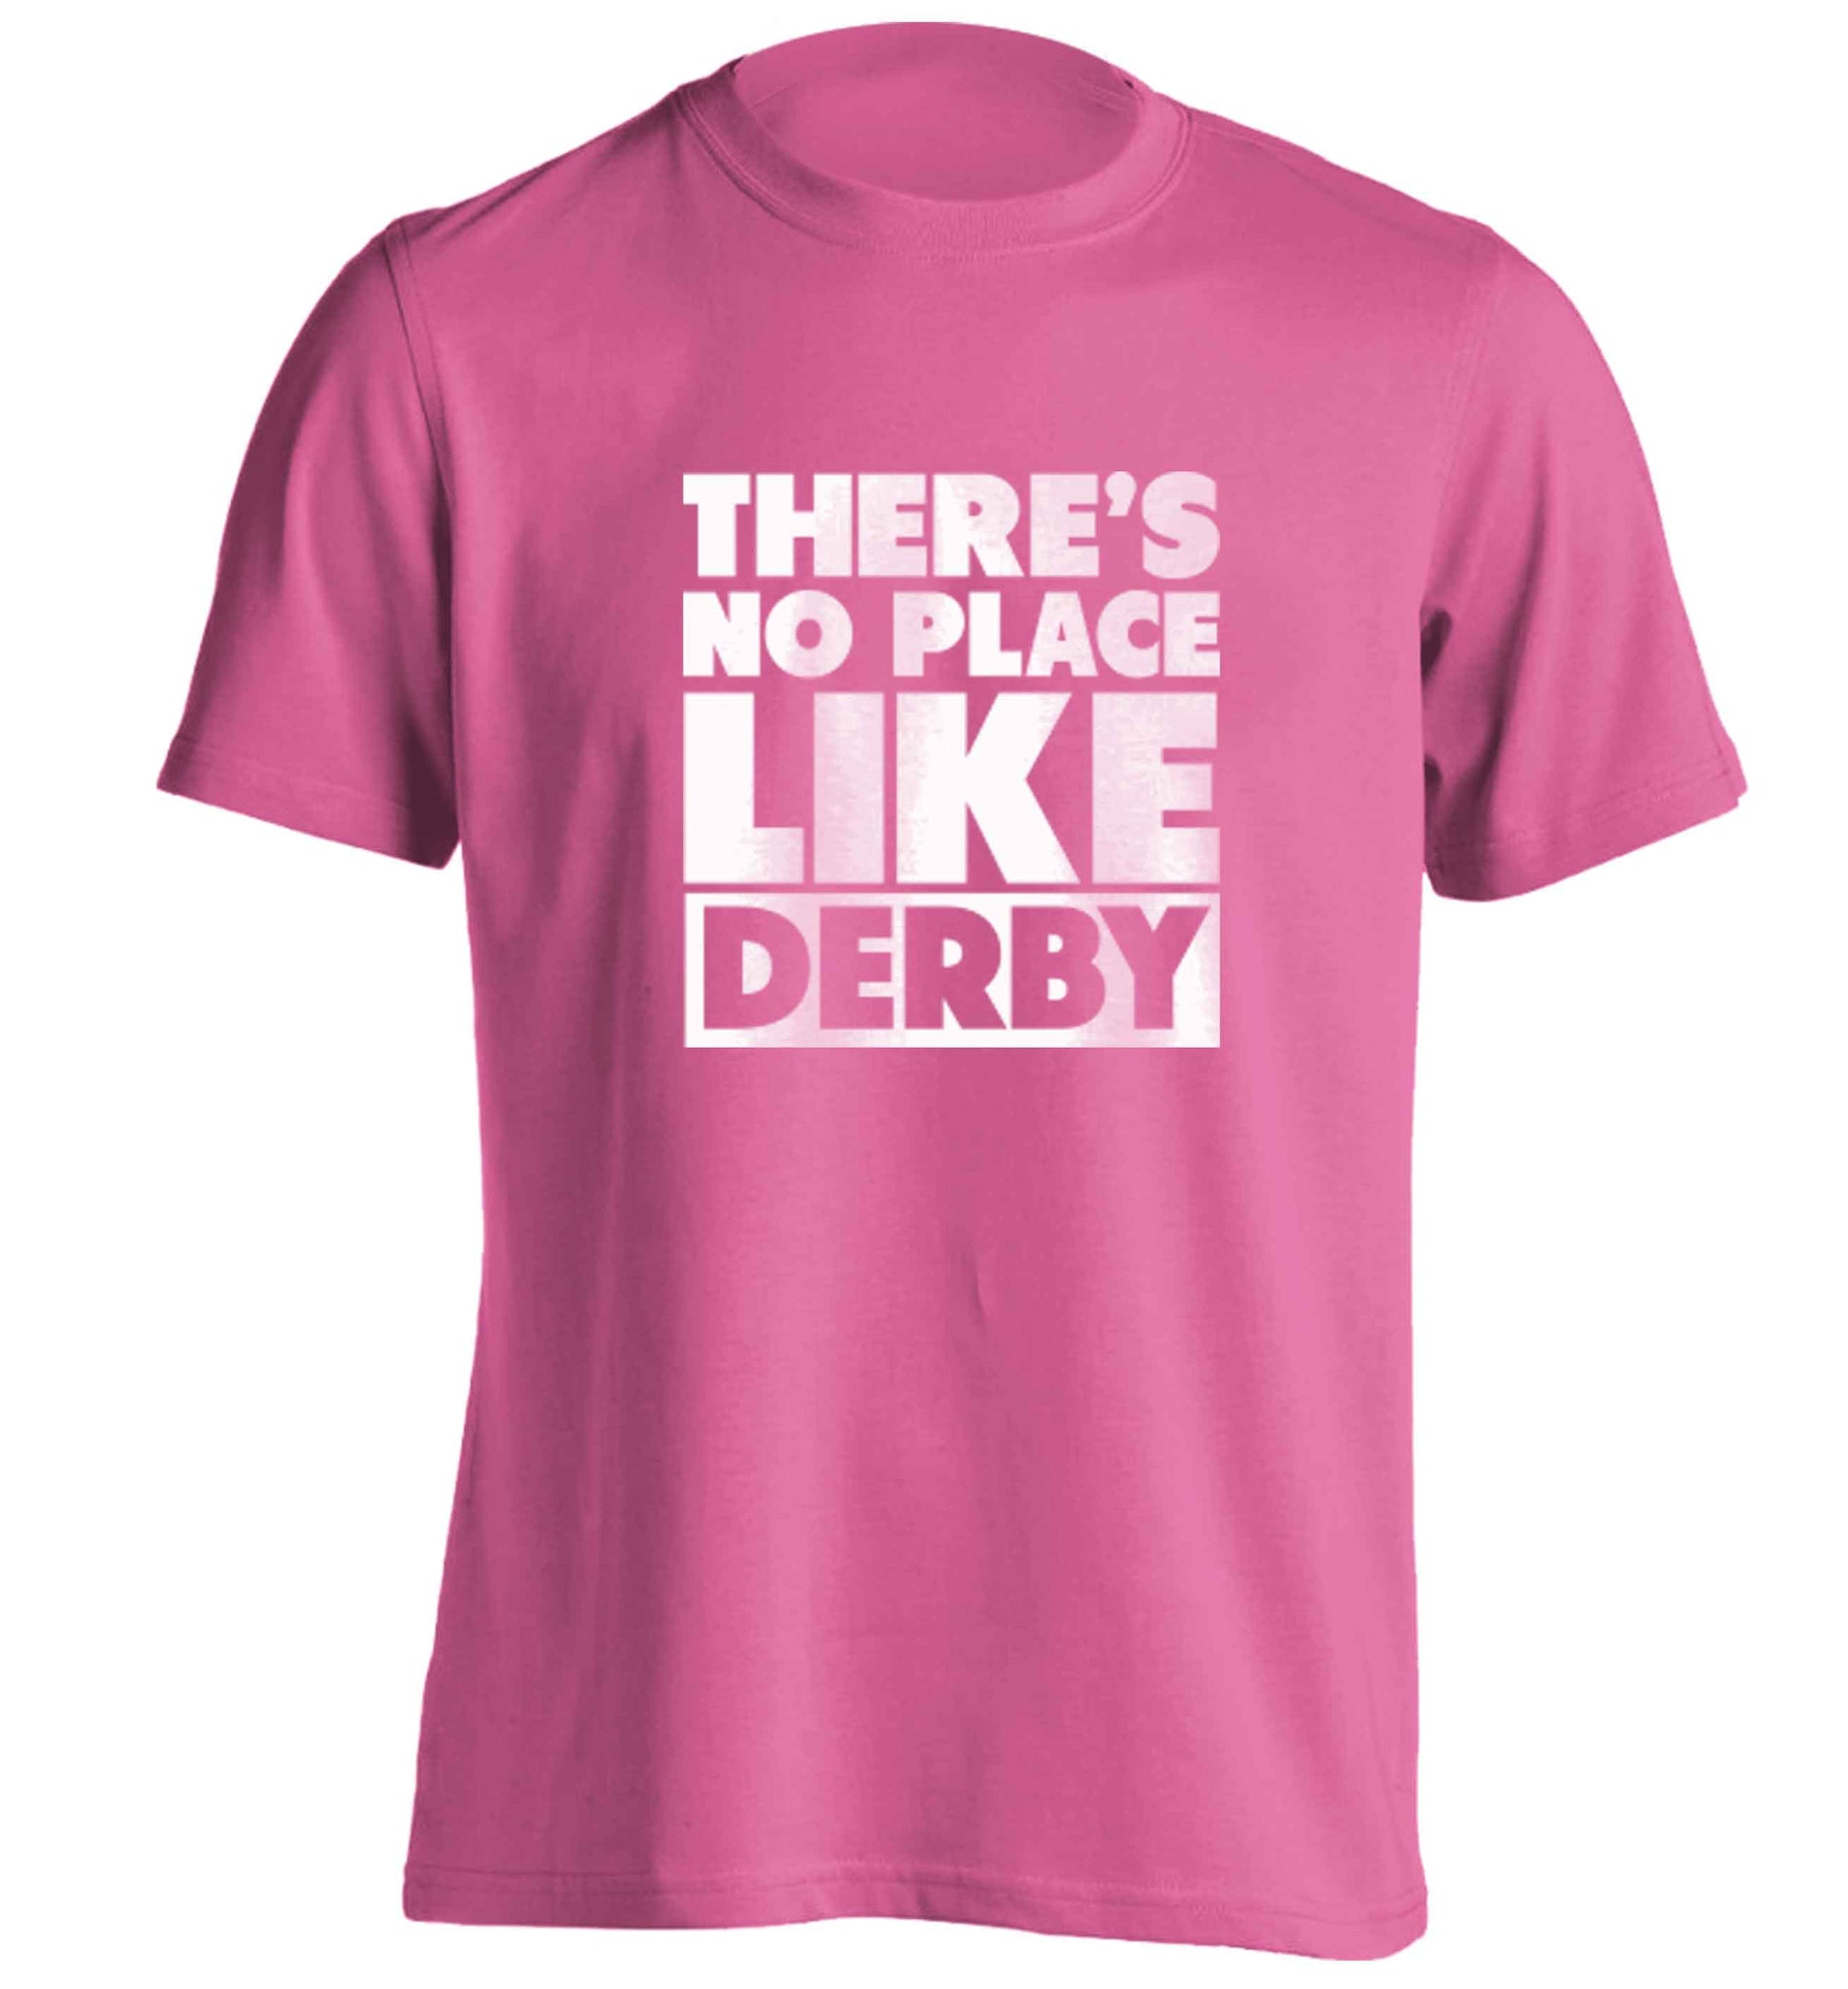 There's no place like Derby adults unisex pink Tshirt 2XL